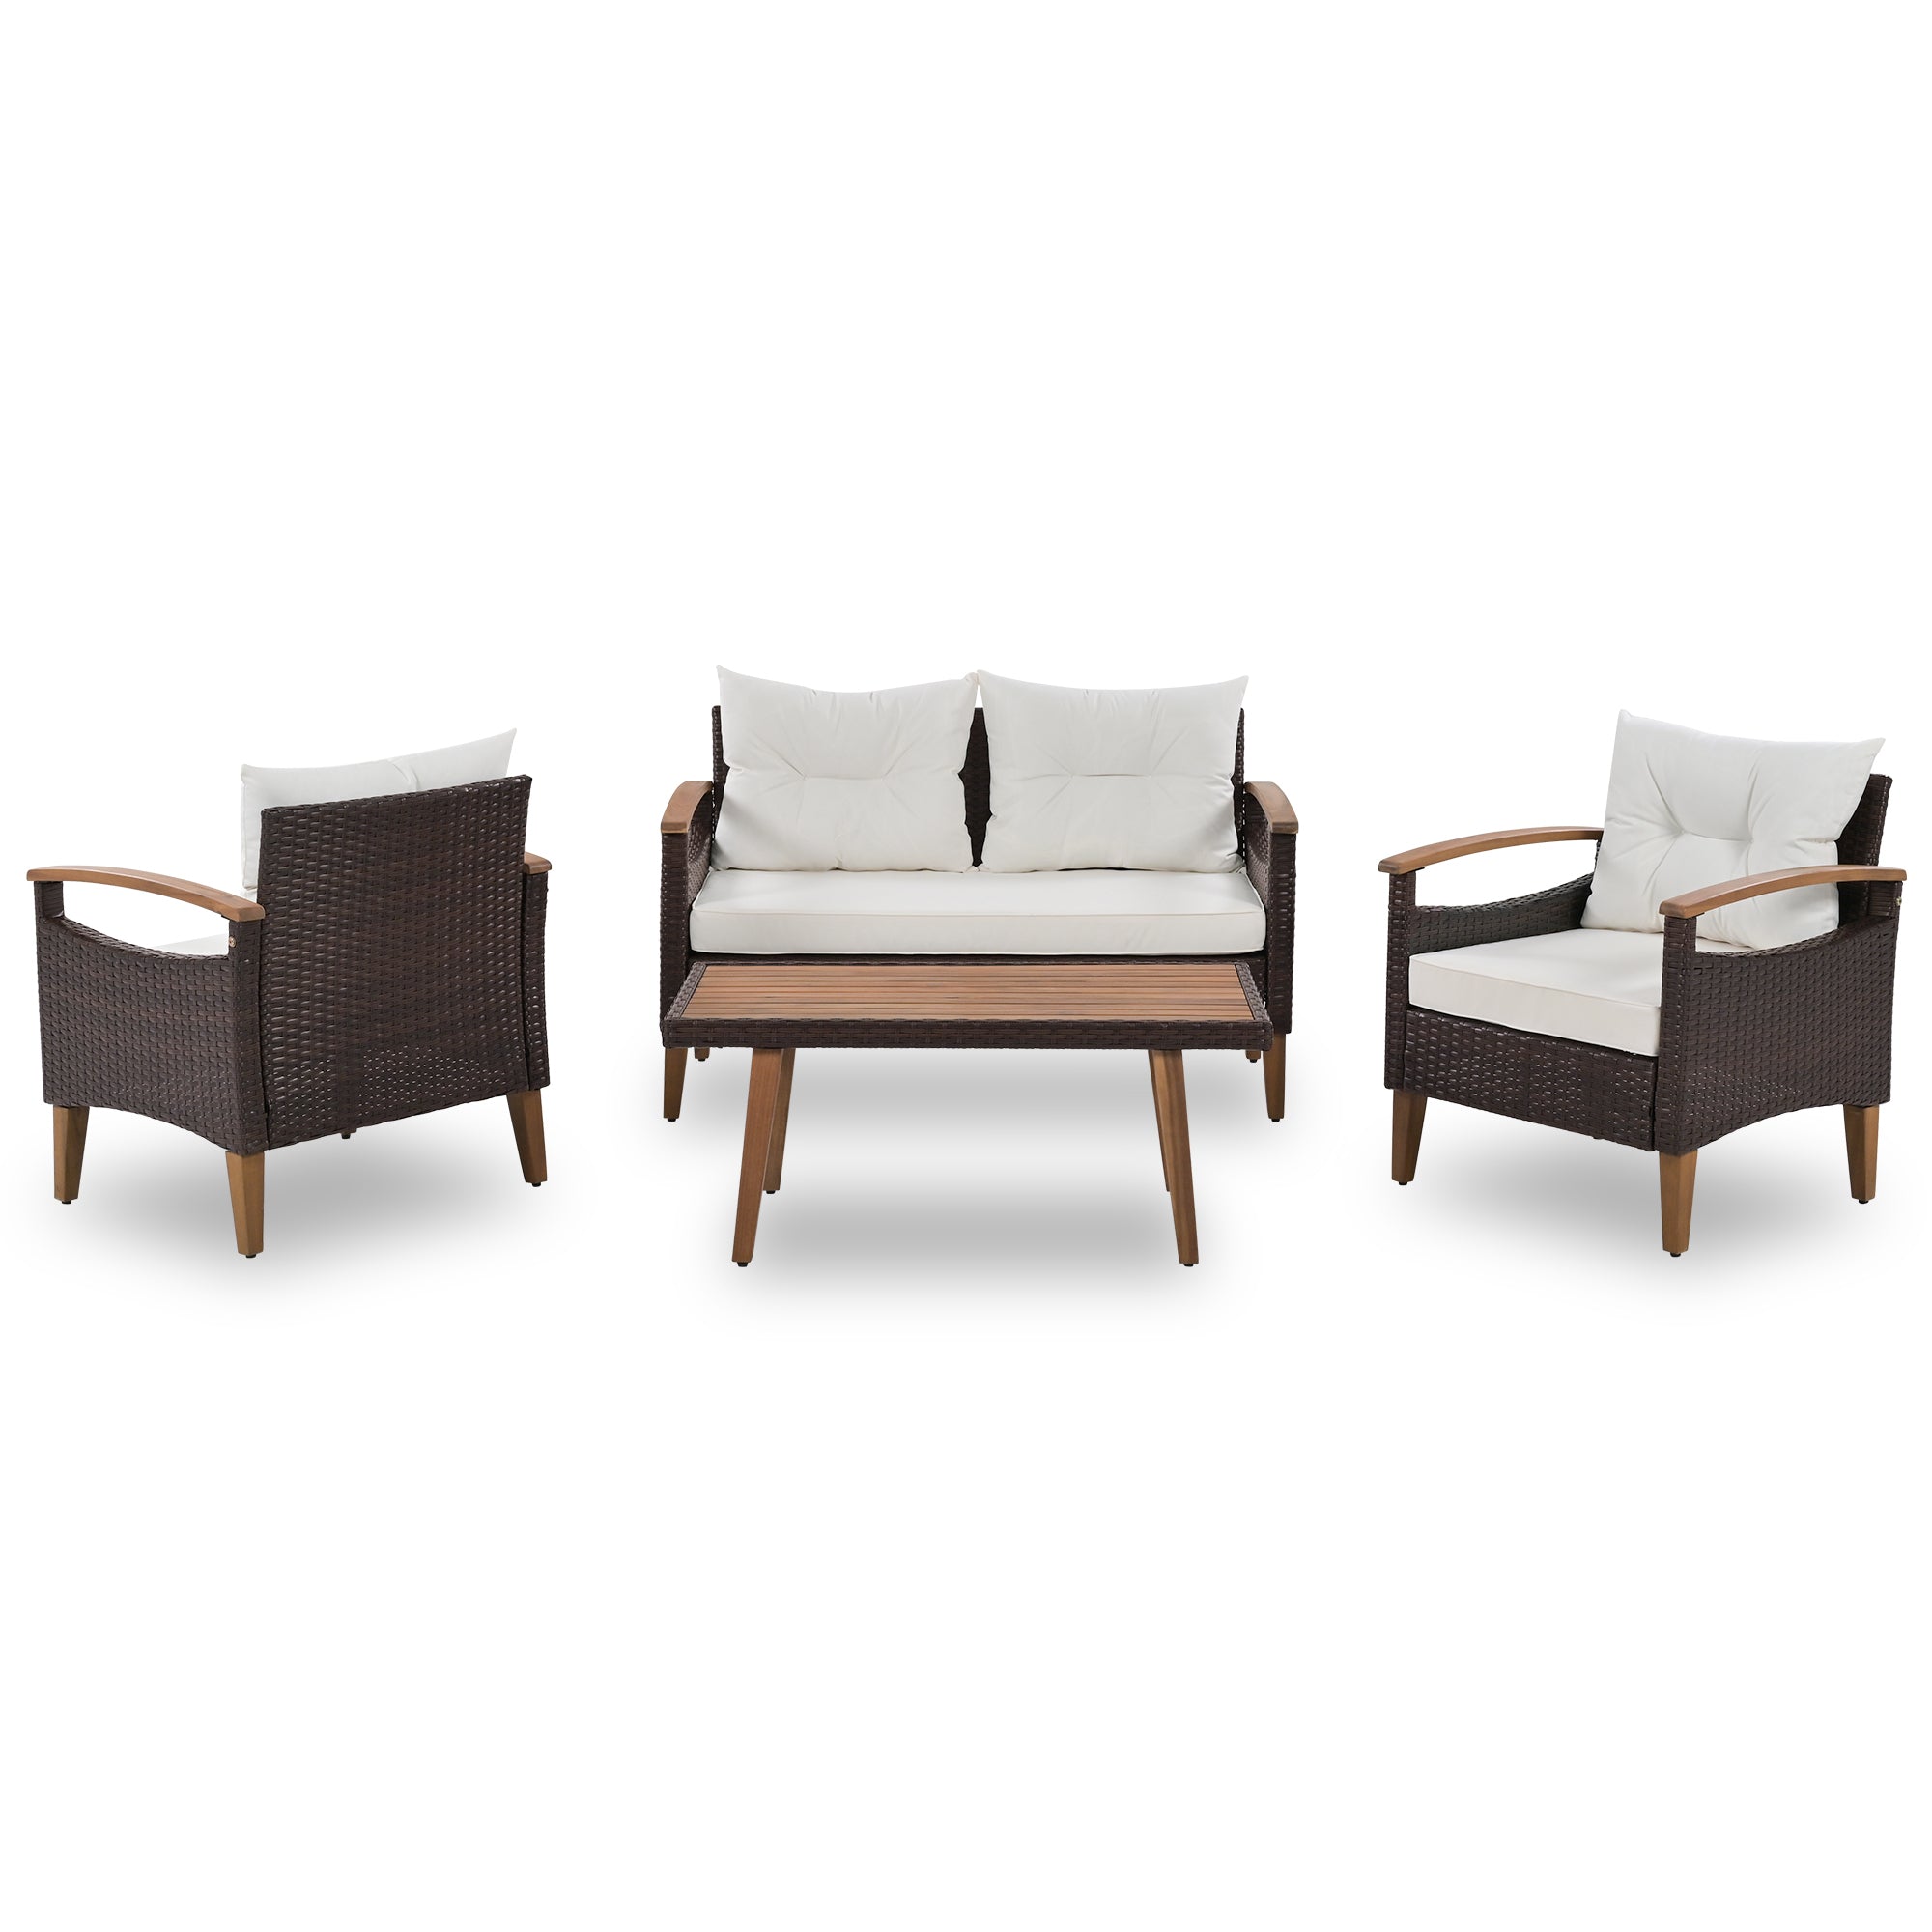 4-Piece PE Rattan Outdoor Sofa Chair Set with Wood Table and Legs